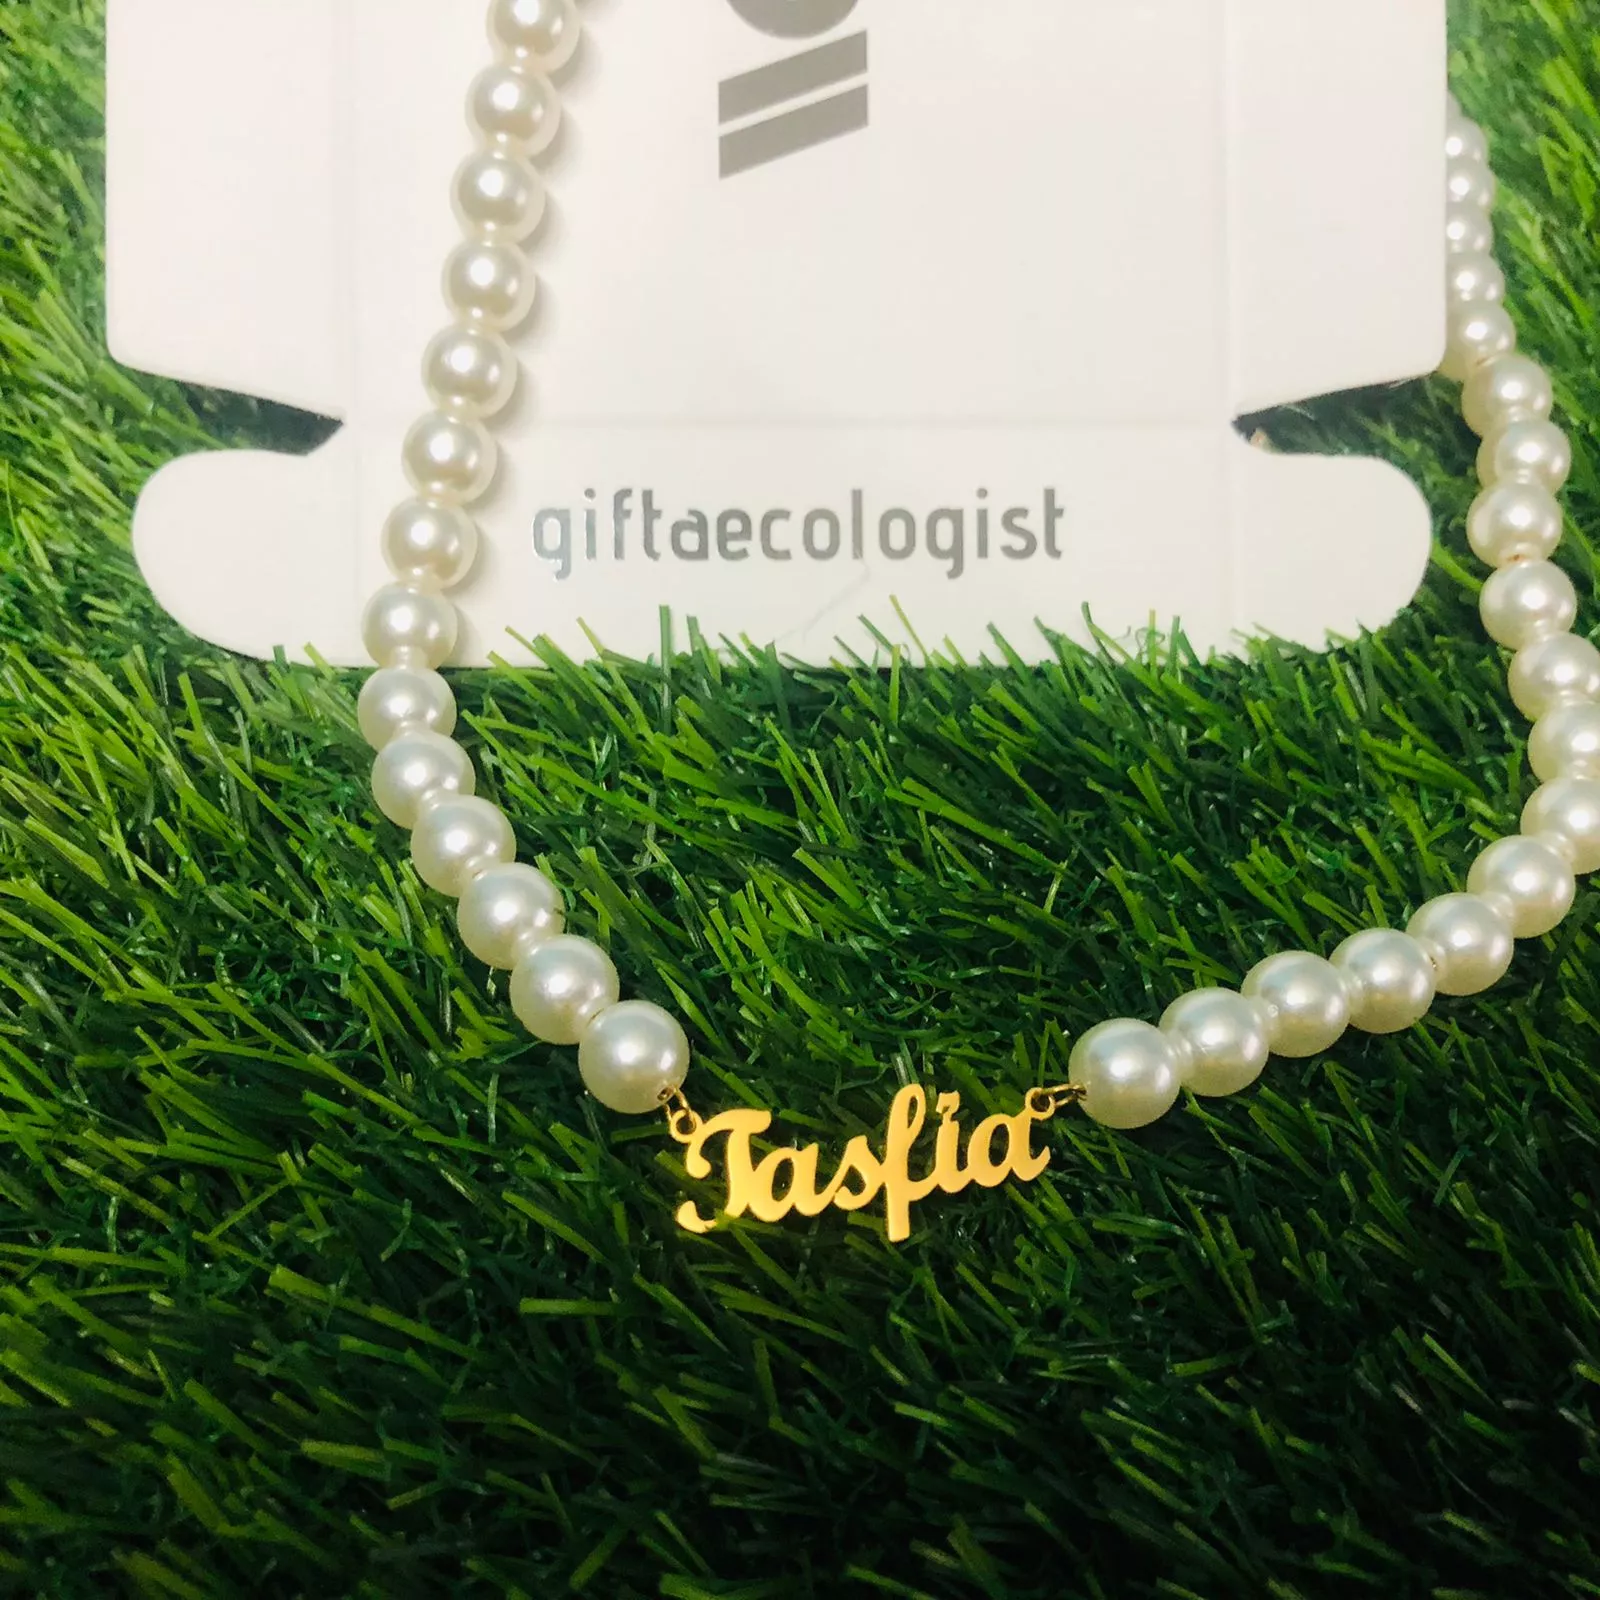 Customized Pearl Chain Name Neclace Giftaecologist